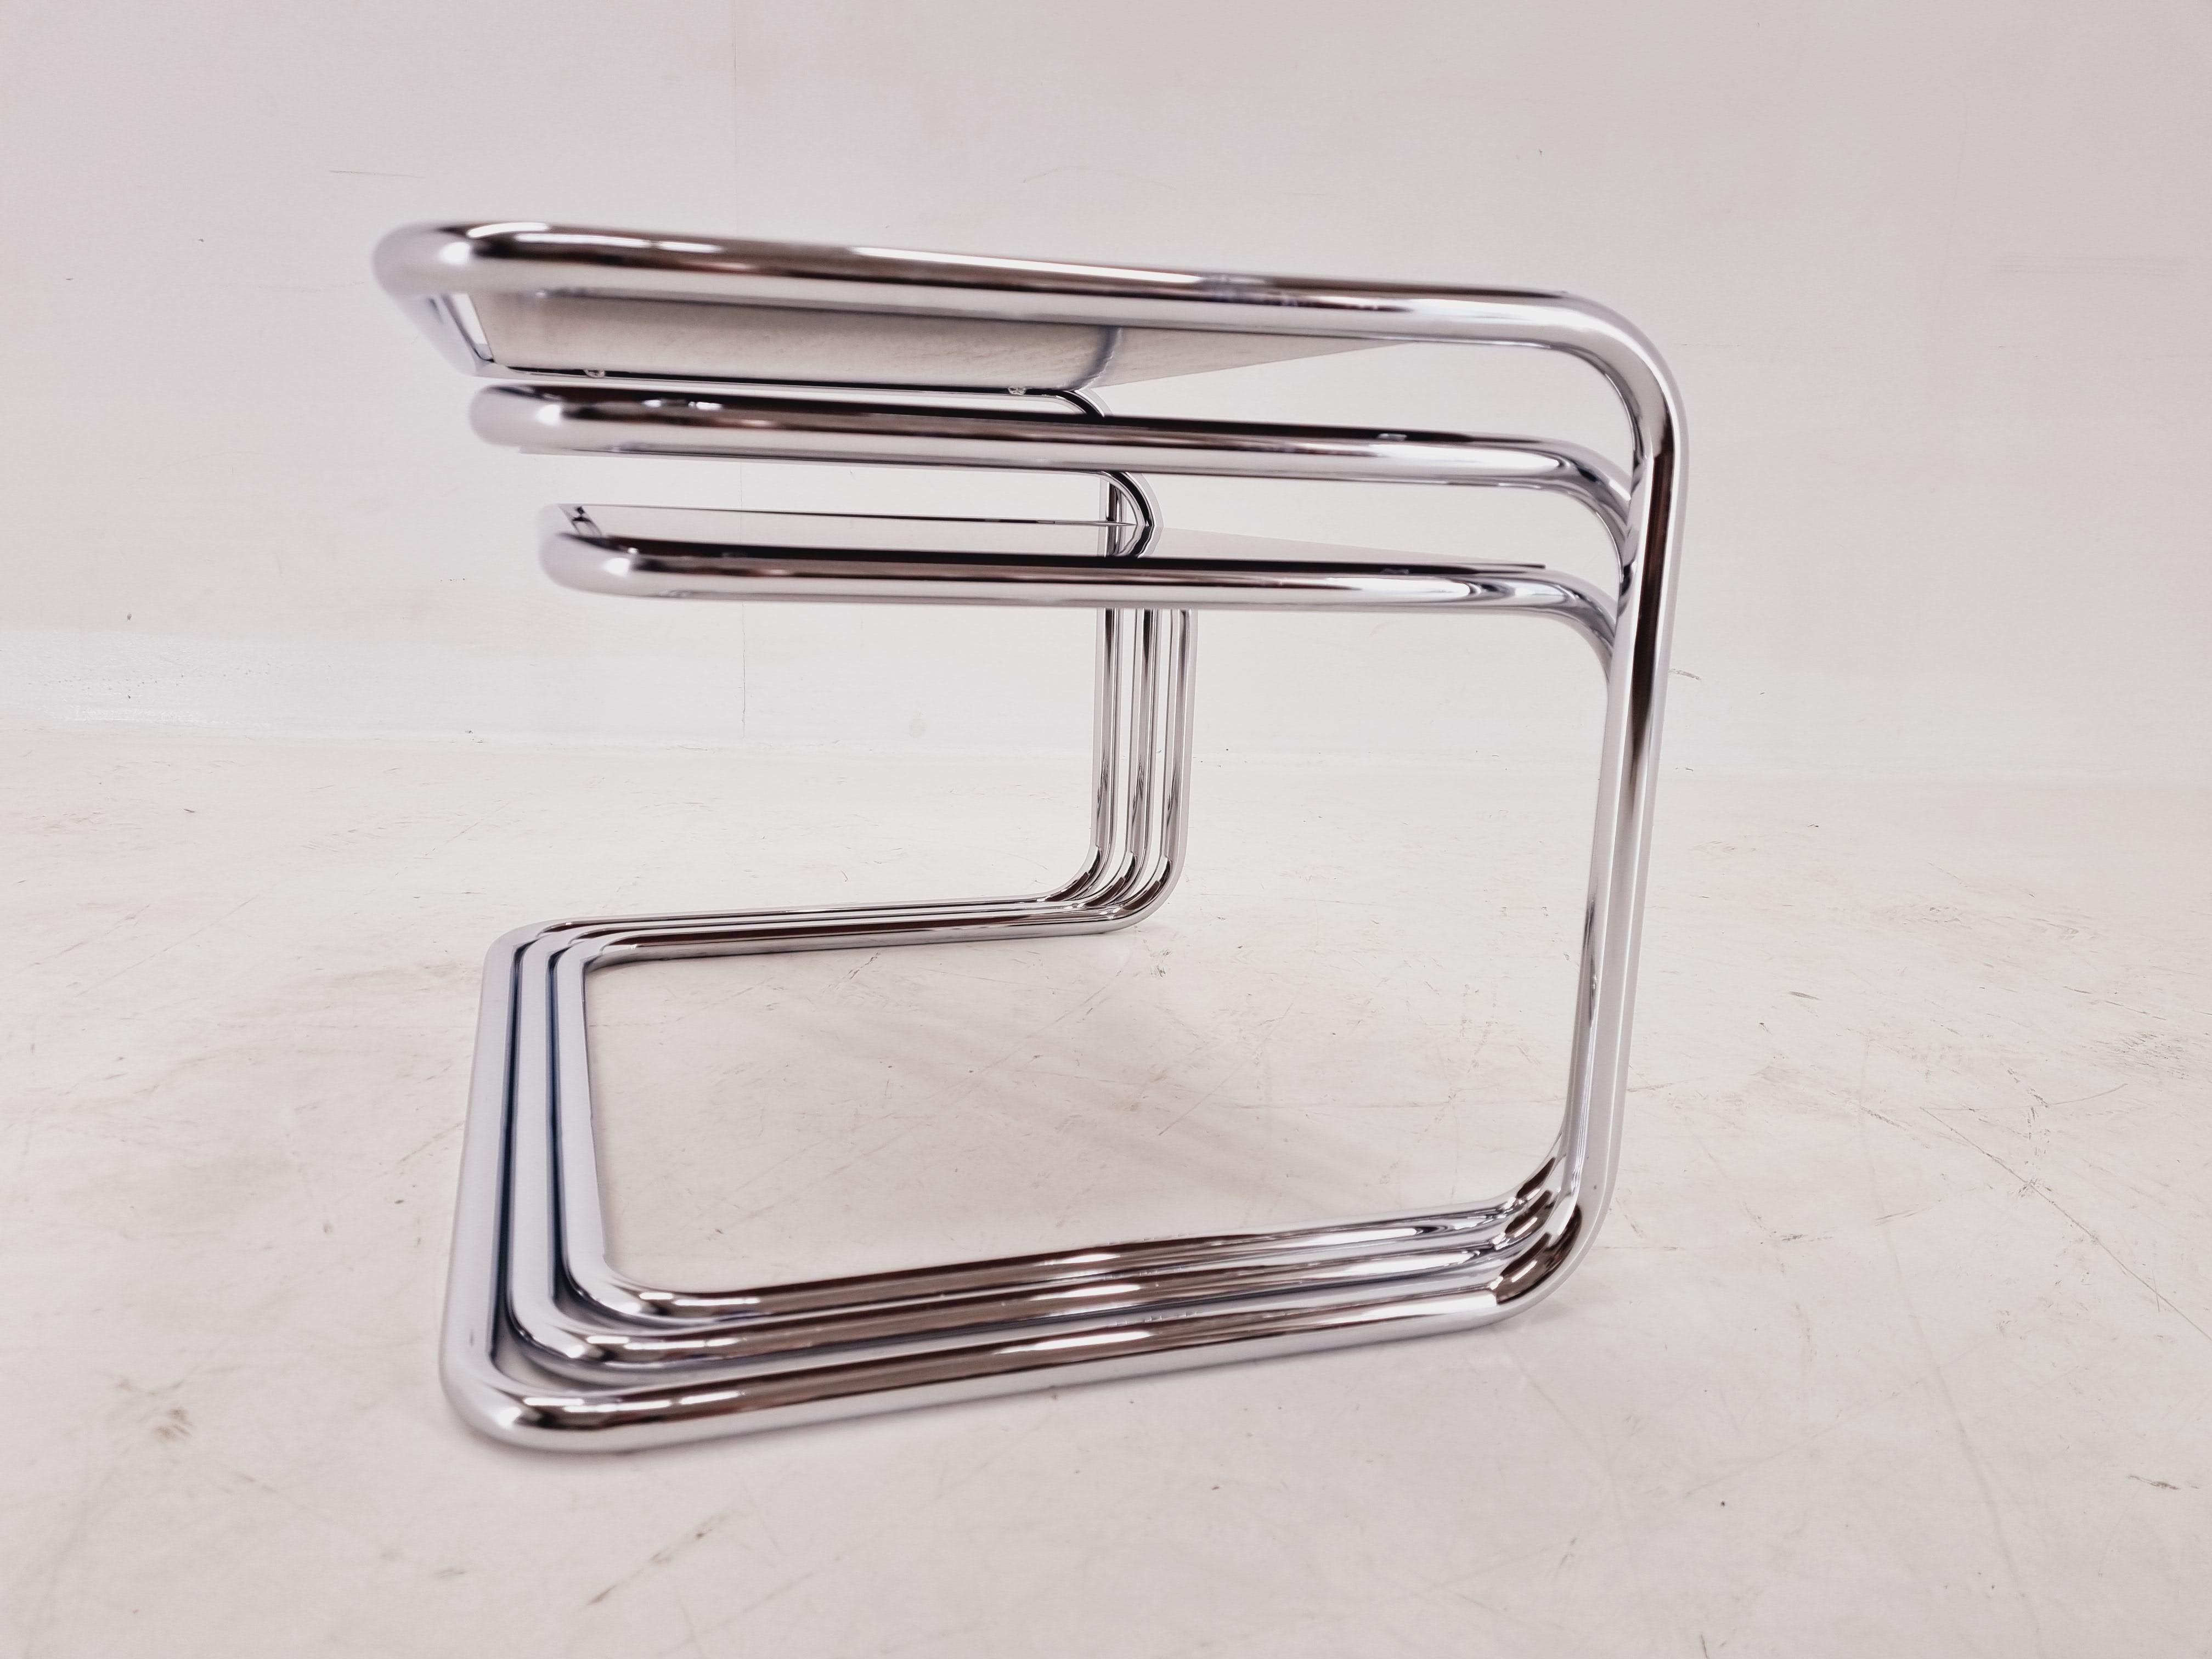 Exclusive Rare Midcentury Nesting Tables, Cocobolo Palisandr and Chrome, 1950s. For Sale 1